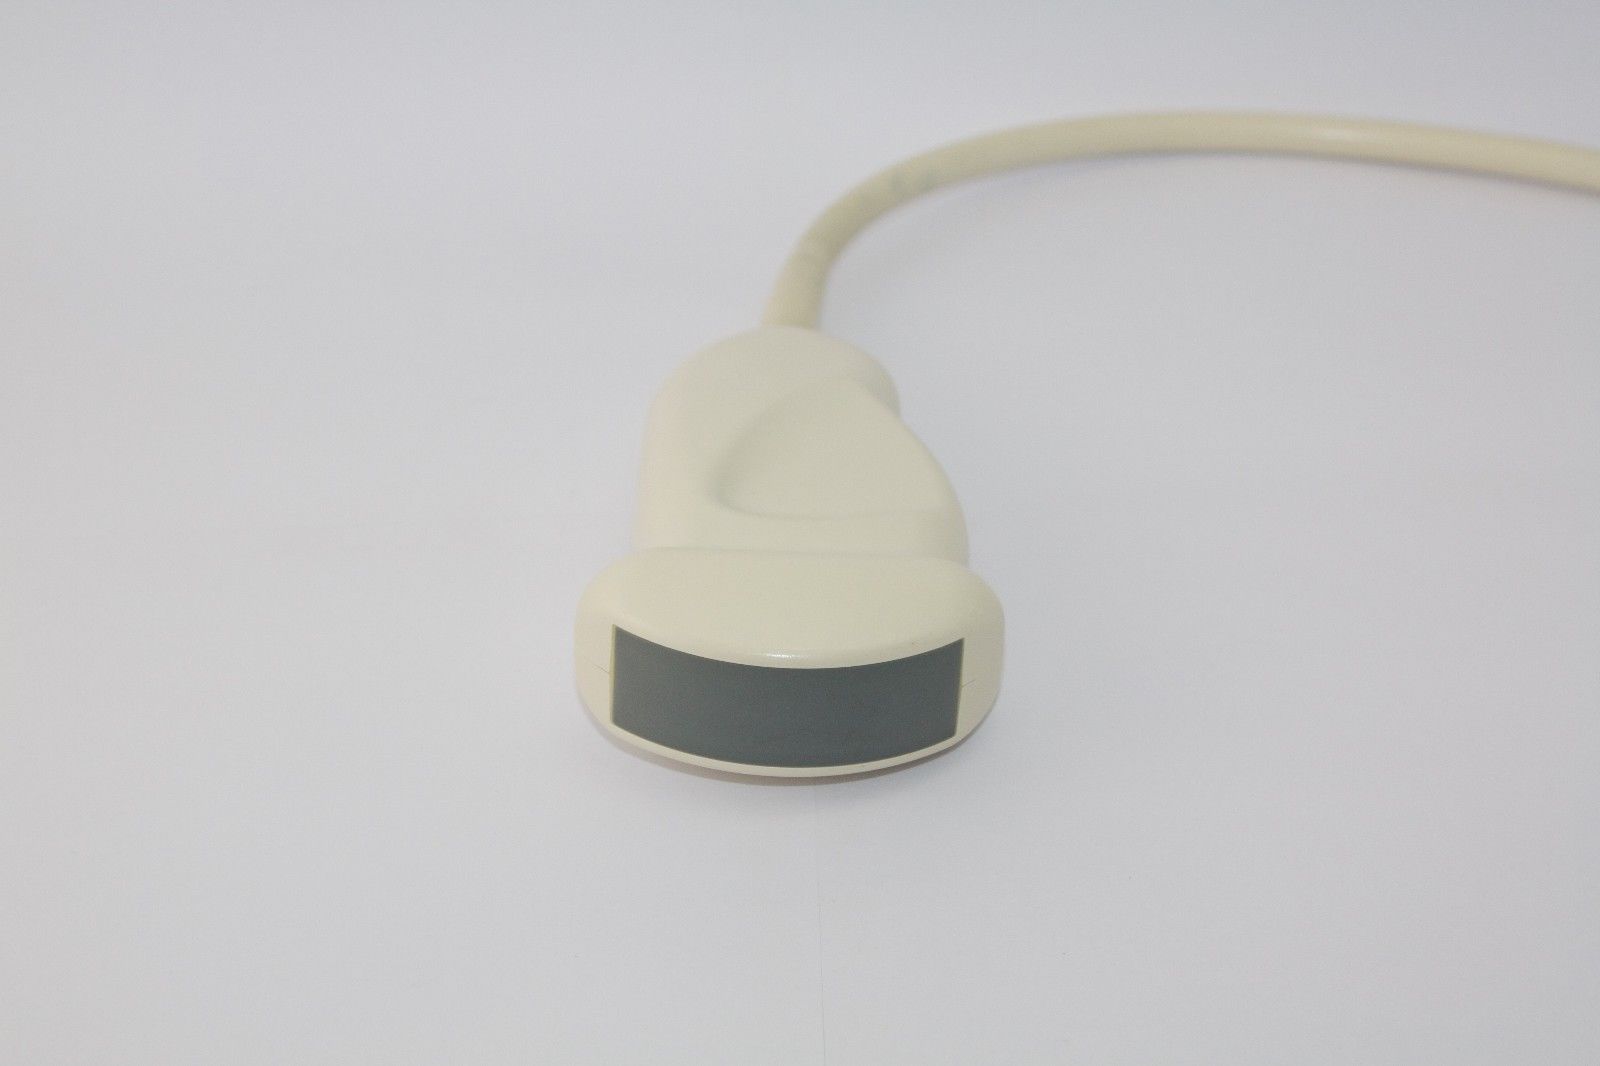 Philips ATL C5-2 40R Curved Array Ultrasound Transducer HDI5000 4000-0574-05